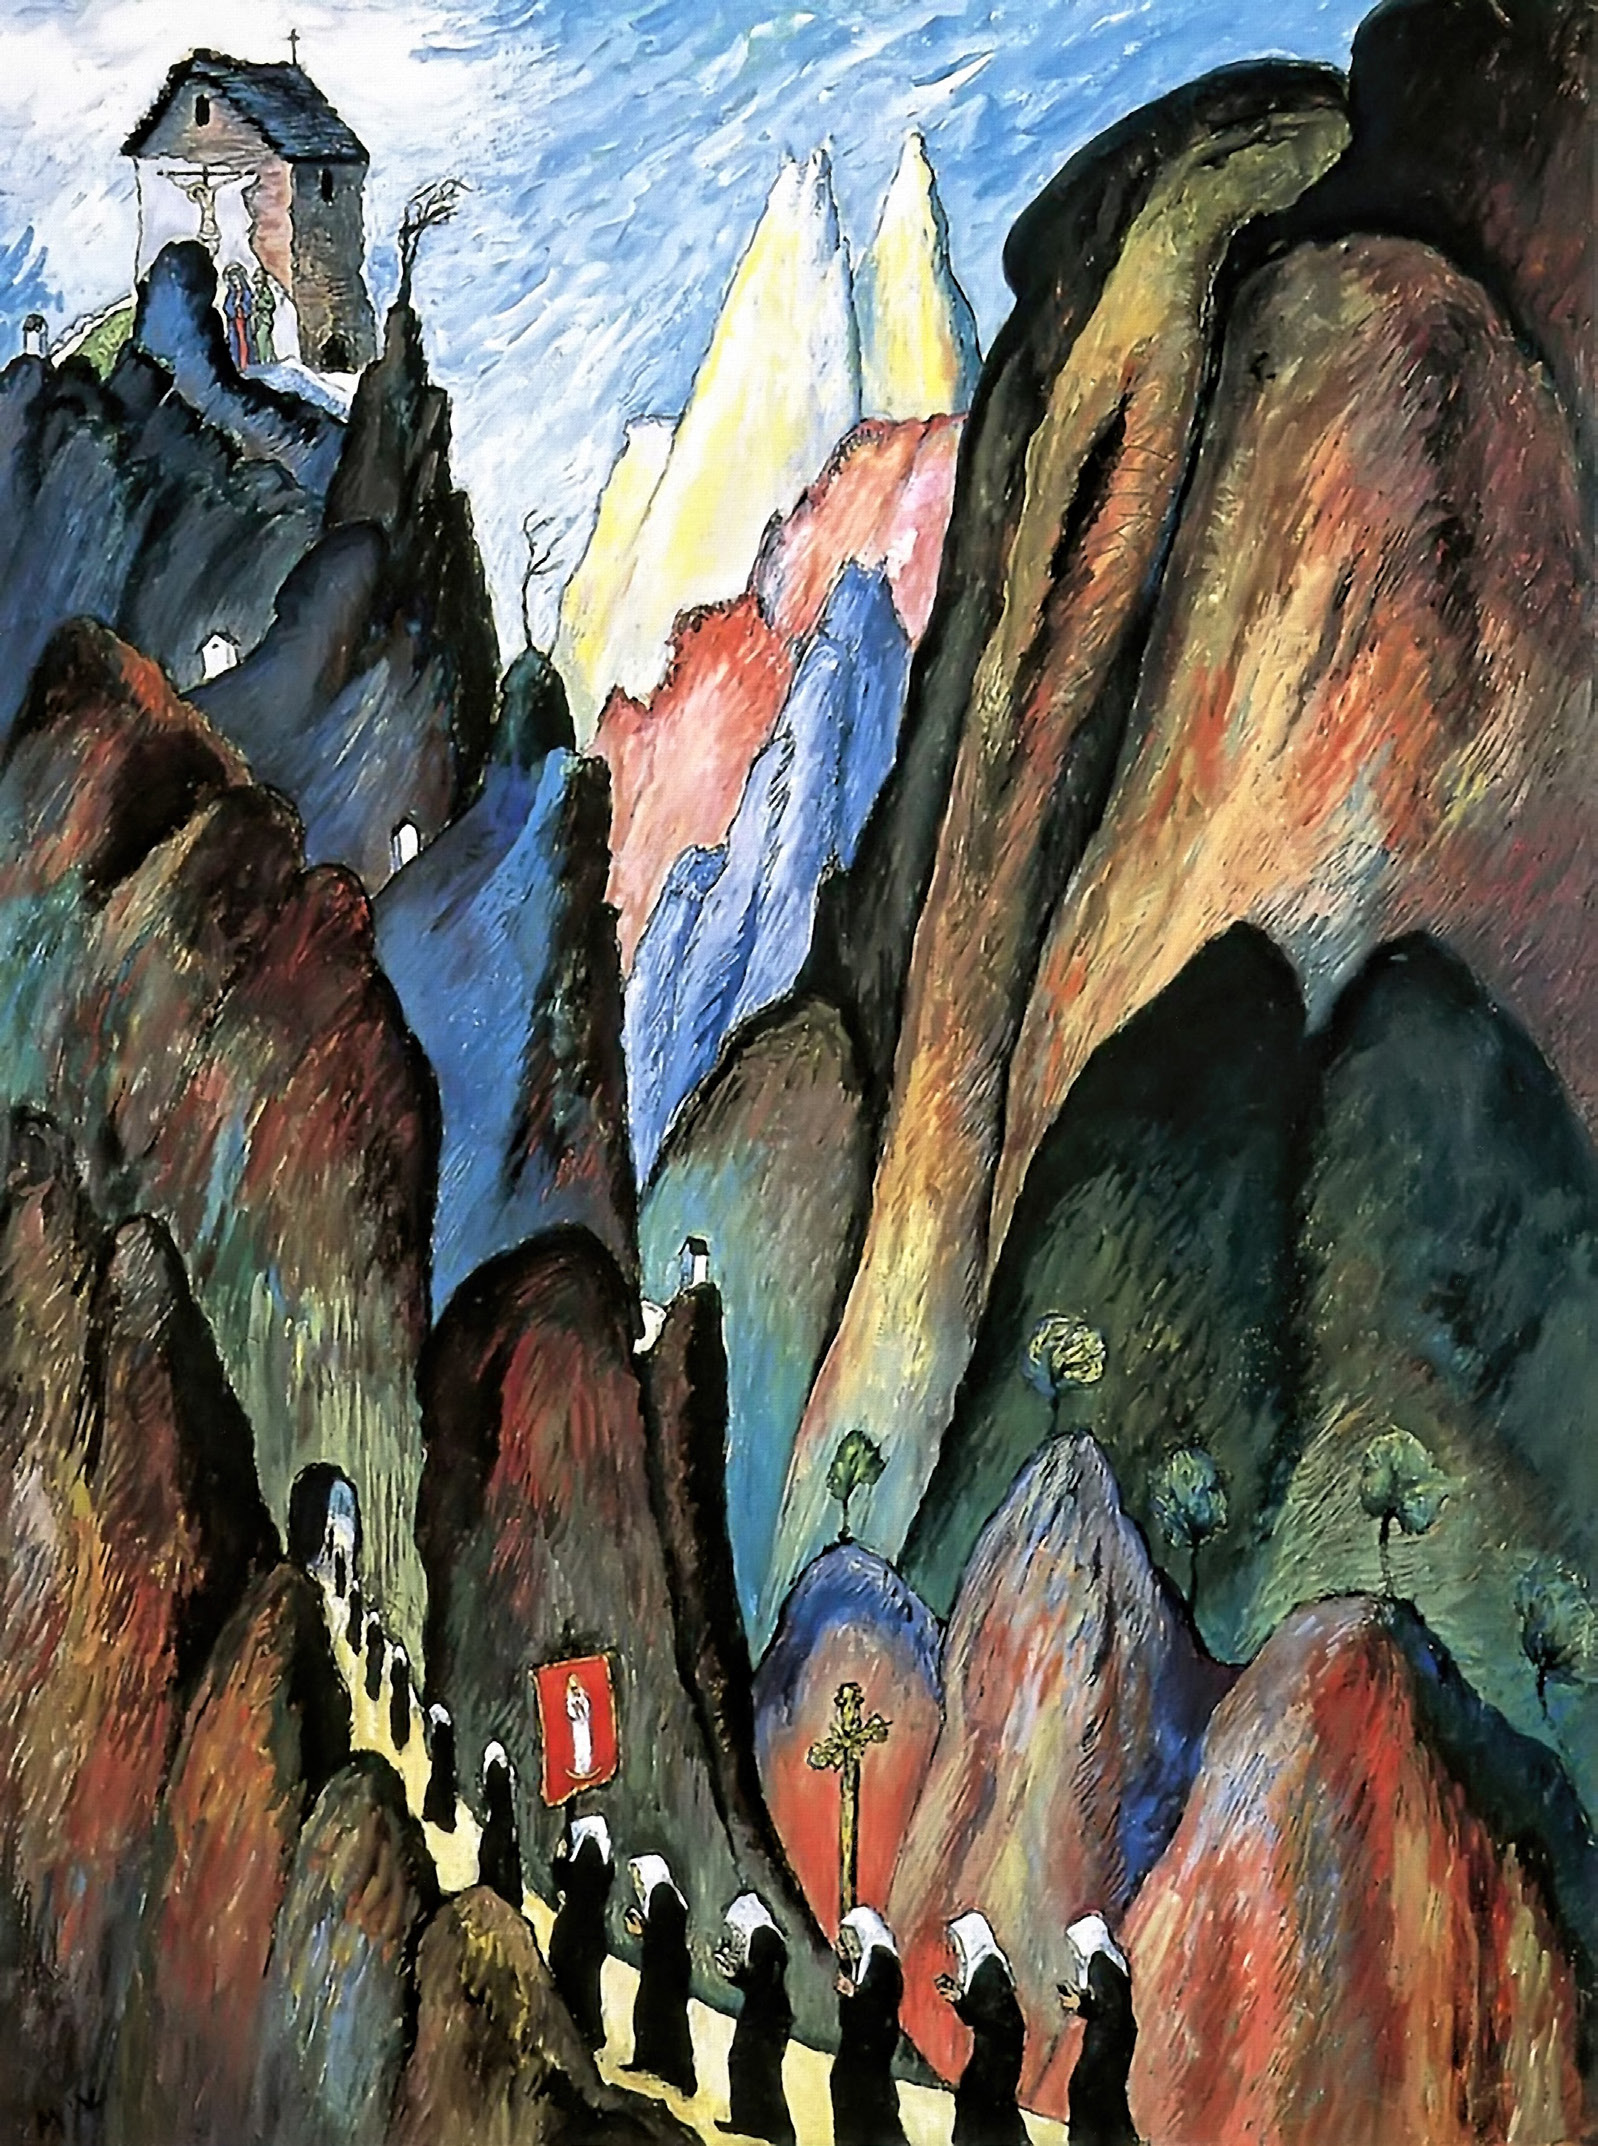 We come unto Christ through the covenant path. Marianne von Werefkin, The Way of the Cross II, 1921. Museo Comunale d’Arte Moderna, Asconda. Permission granted by Cutler Miles Art Gallery, cutlermiles.com. © Cutler Miles Art Gallery.